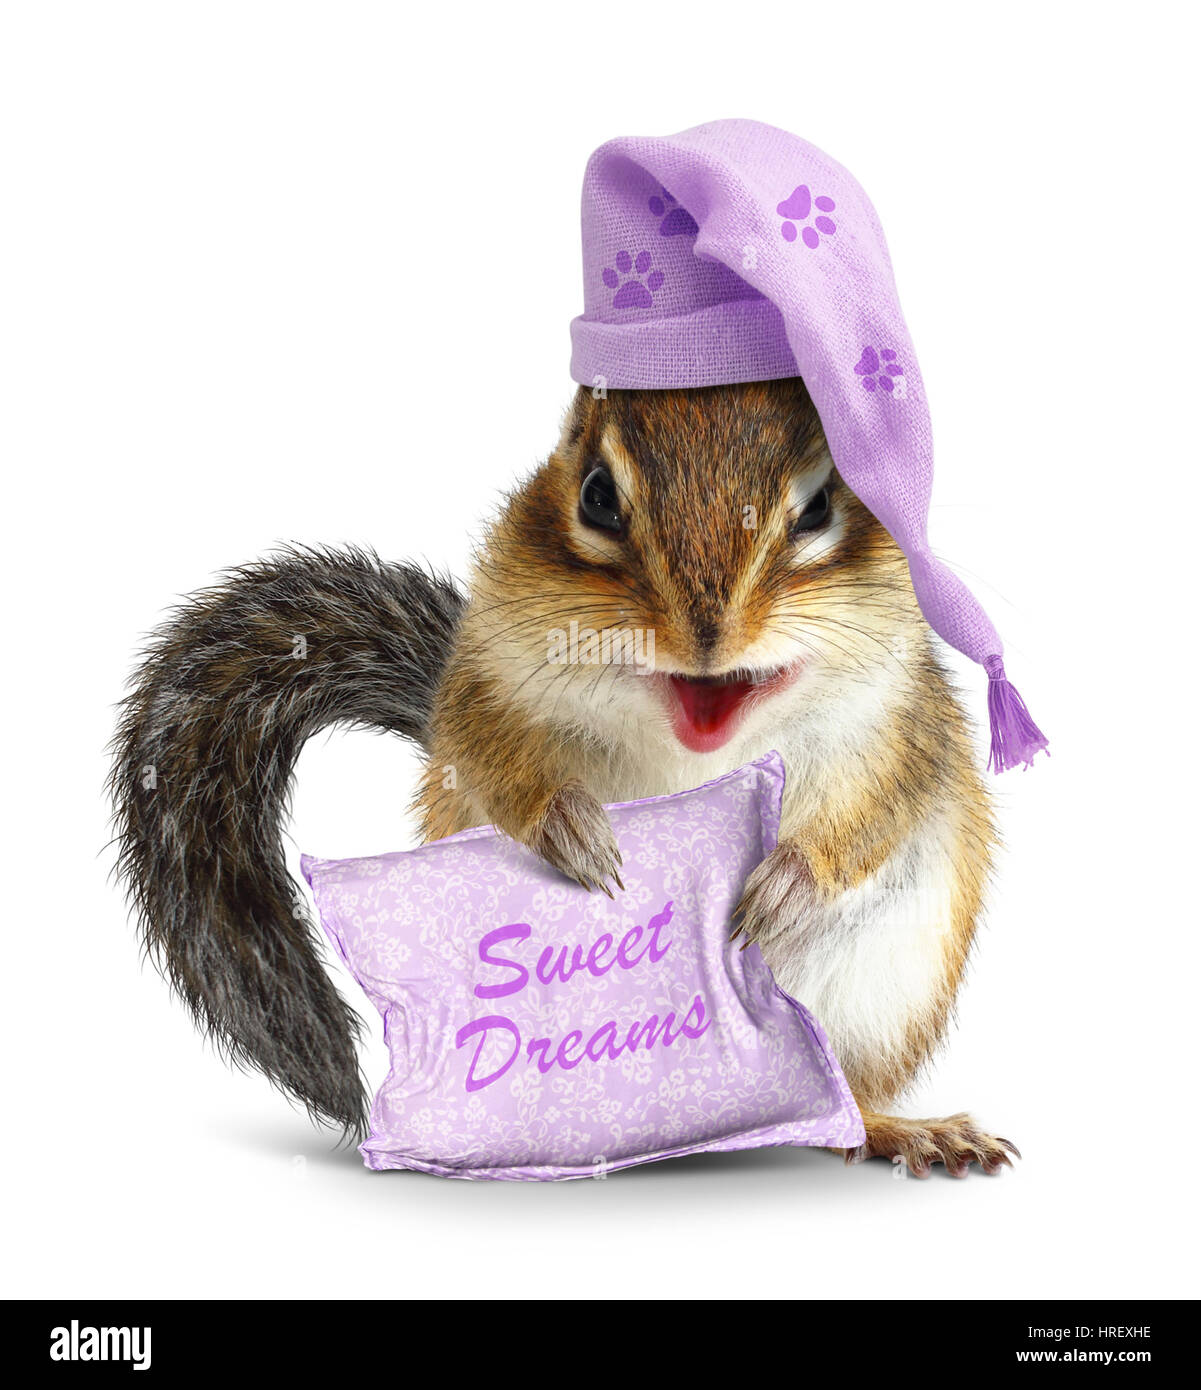 Sweet dreams concept, funny animal chipmunk with pillow and sleeping cap Stock Photo